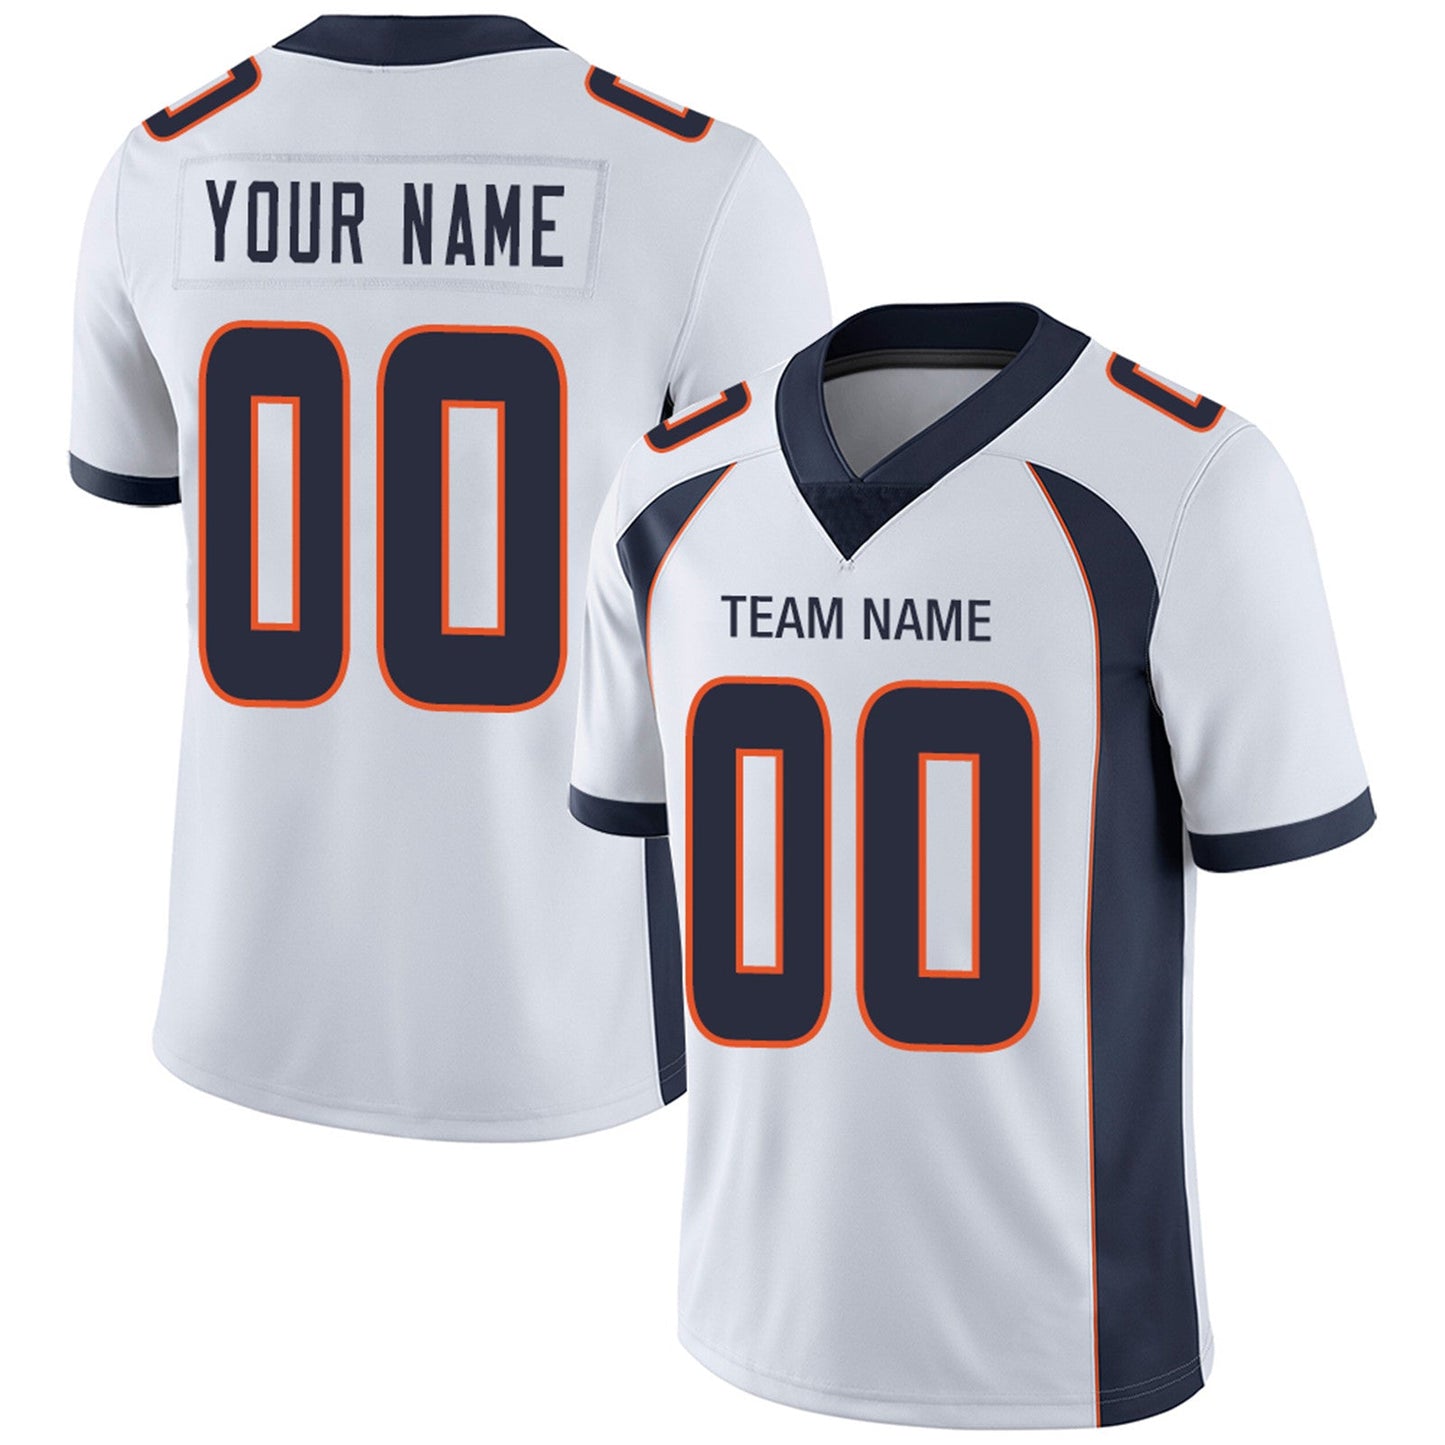 Custom D.Broncos Football Jerseys Team Player or Personalized Design Your Own Name for Men's Women's Youth Jerseys Orange